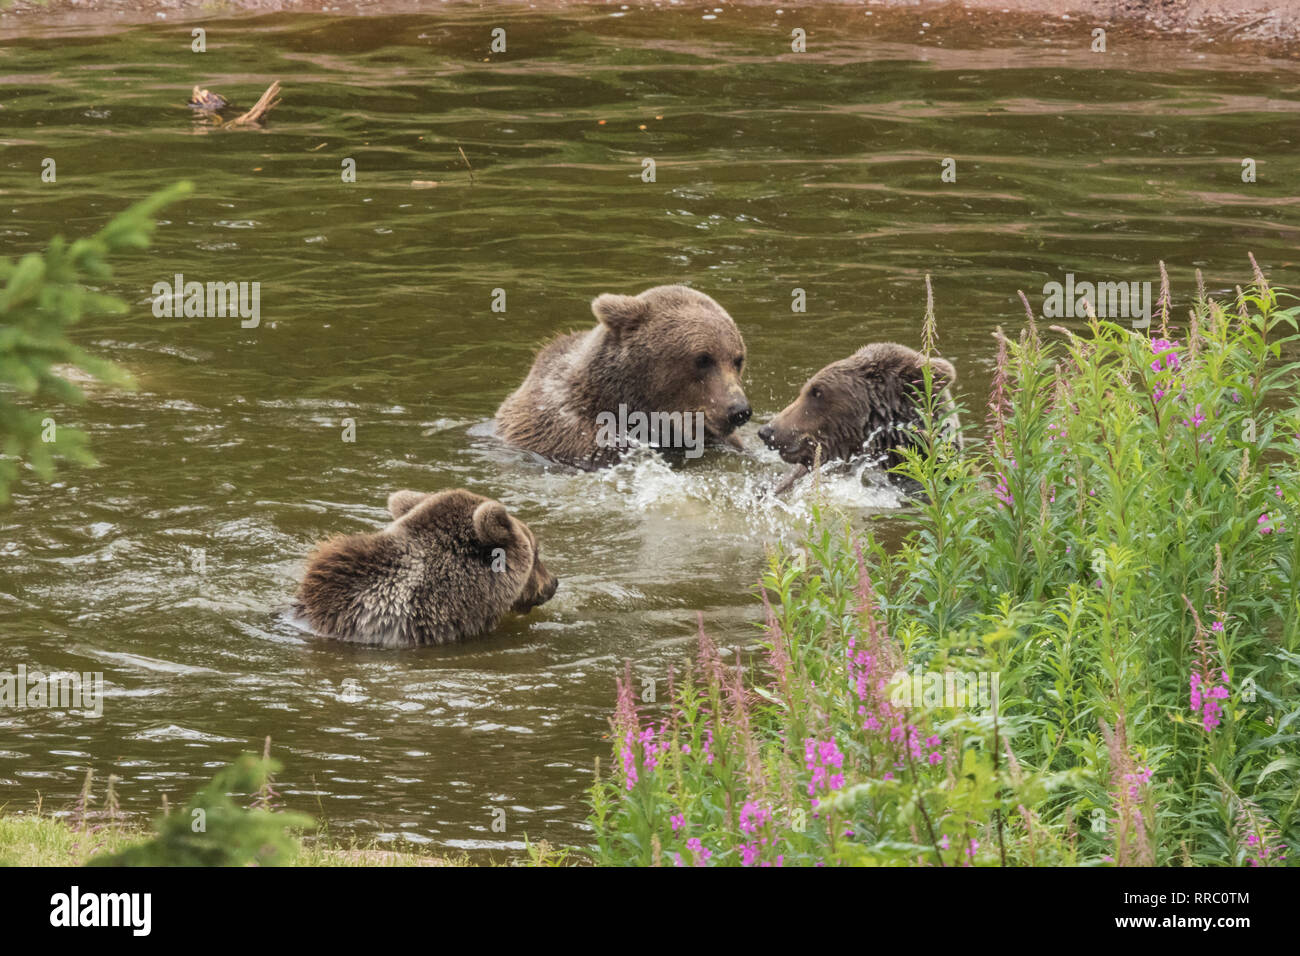 Three bears involved in a philosophic discussion while bathing and splashing in a pond Stock Photo